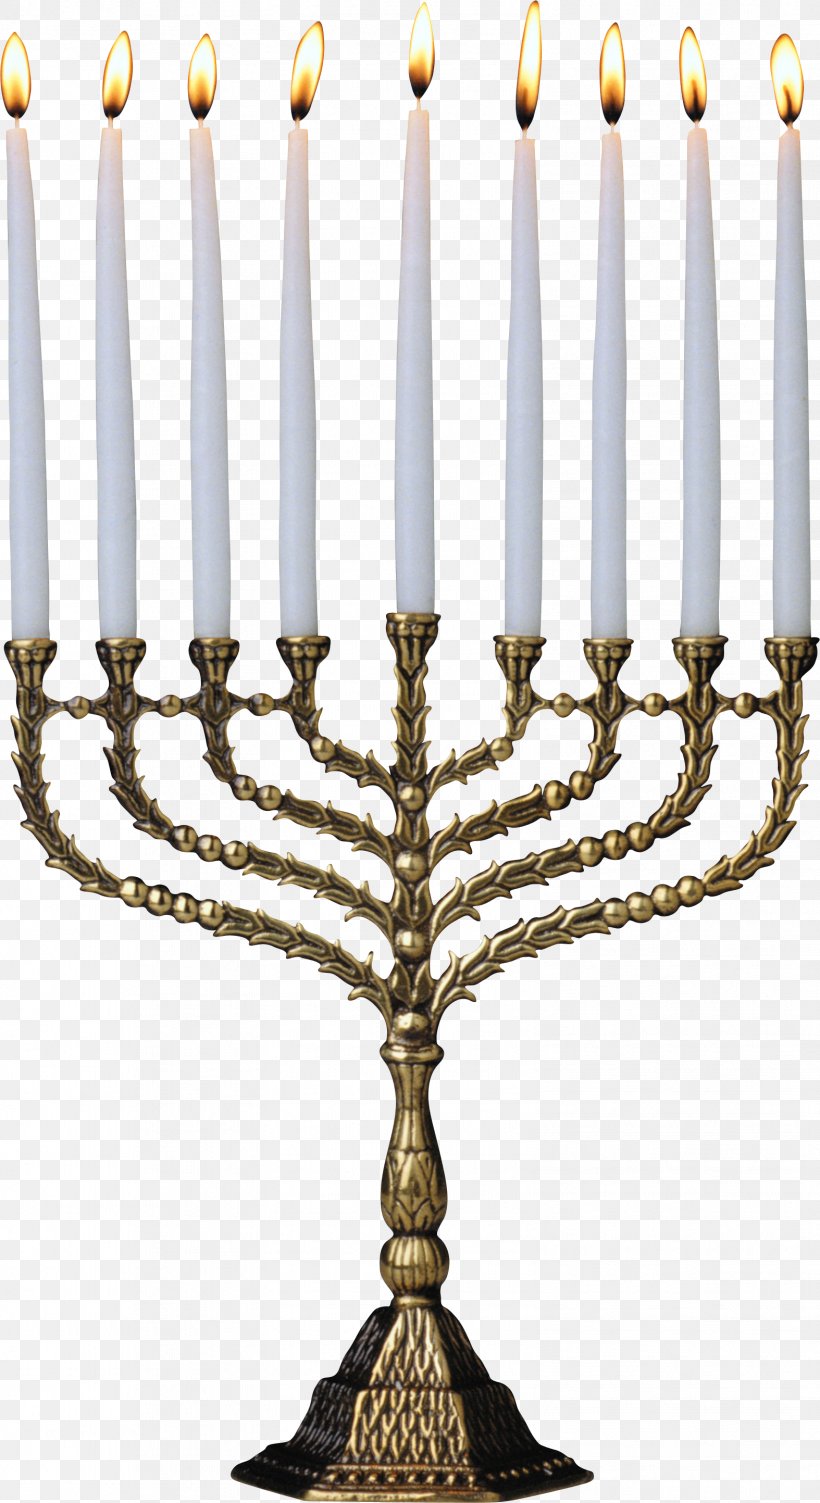 Candle Clip Art, PNG, 1574x2886px, Temple In Jerusalem, Candle, Candle Holder, Decor, Dreidel Download Free